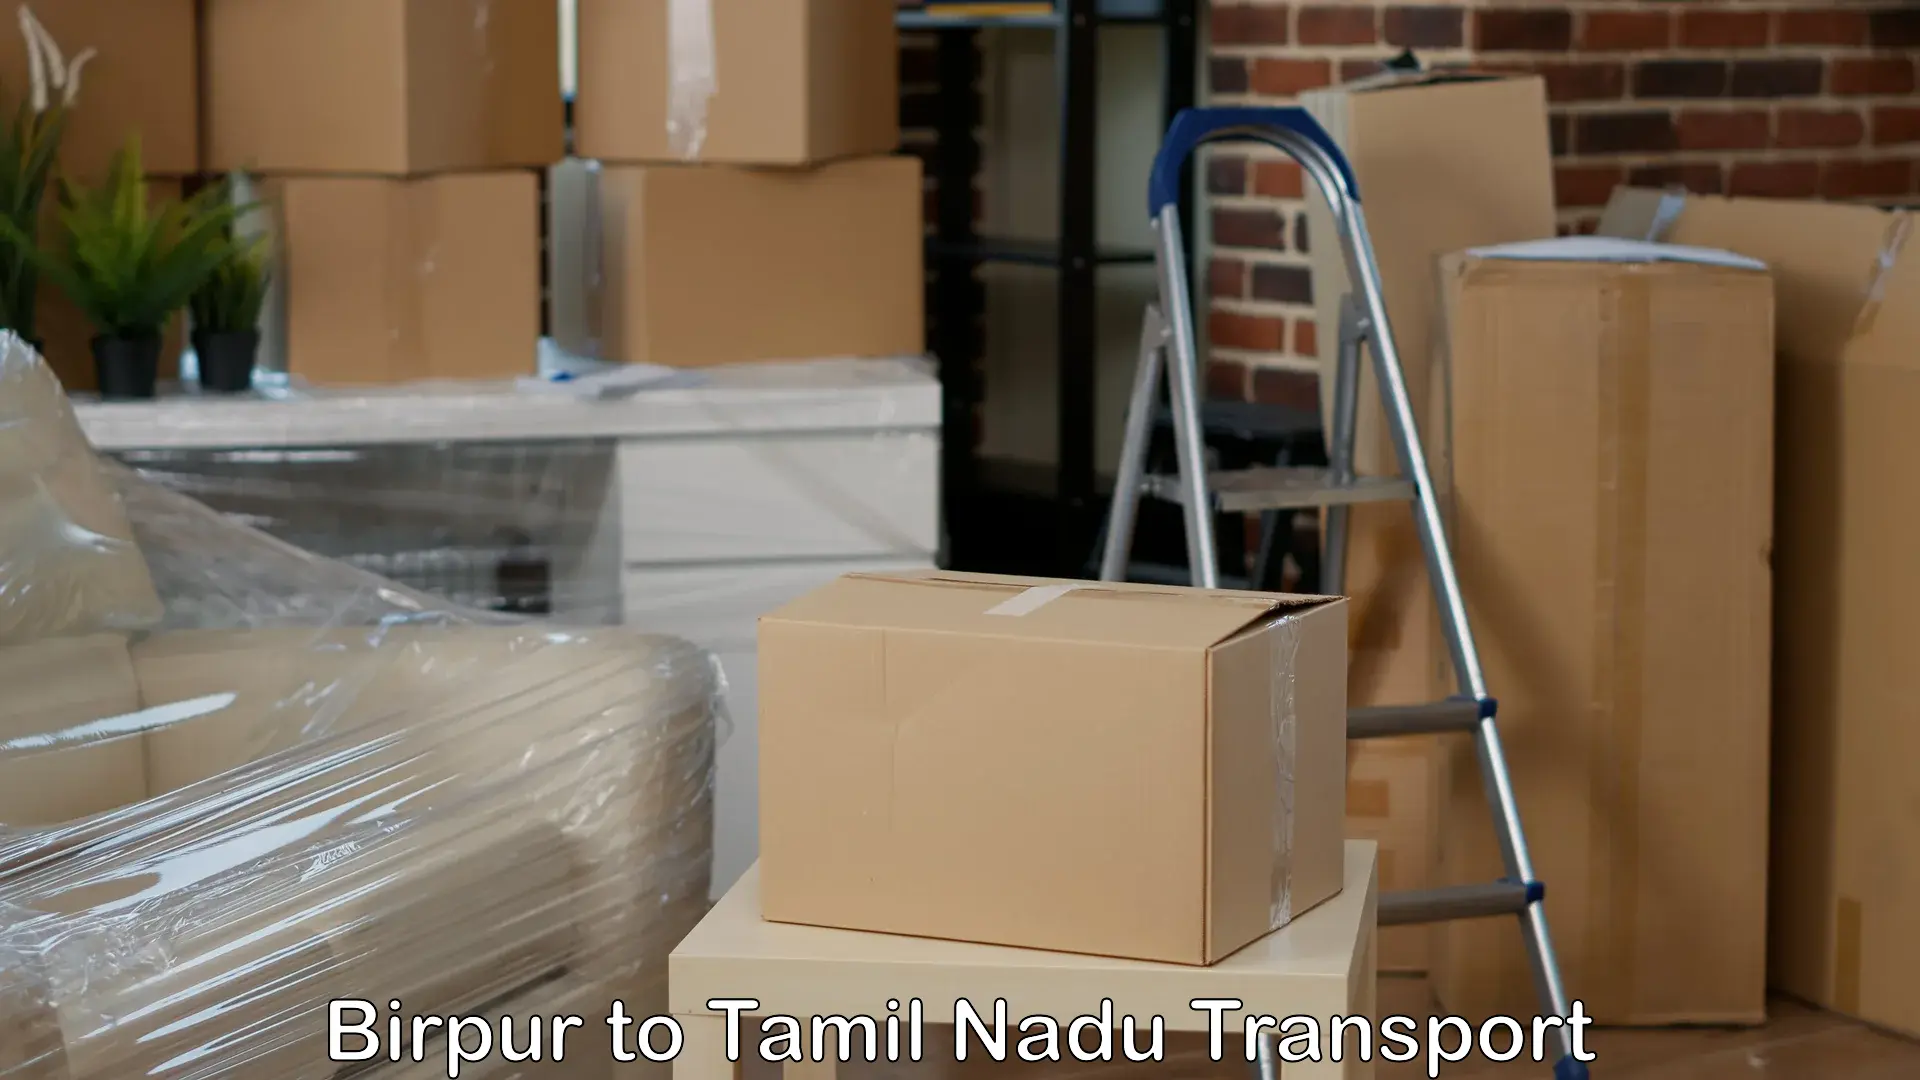 Commercial transport service Birpur to Chennai